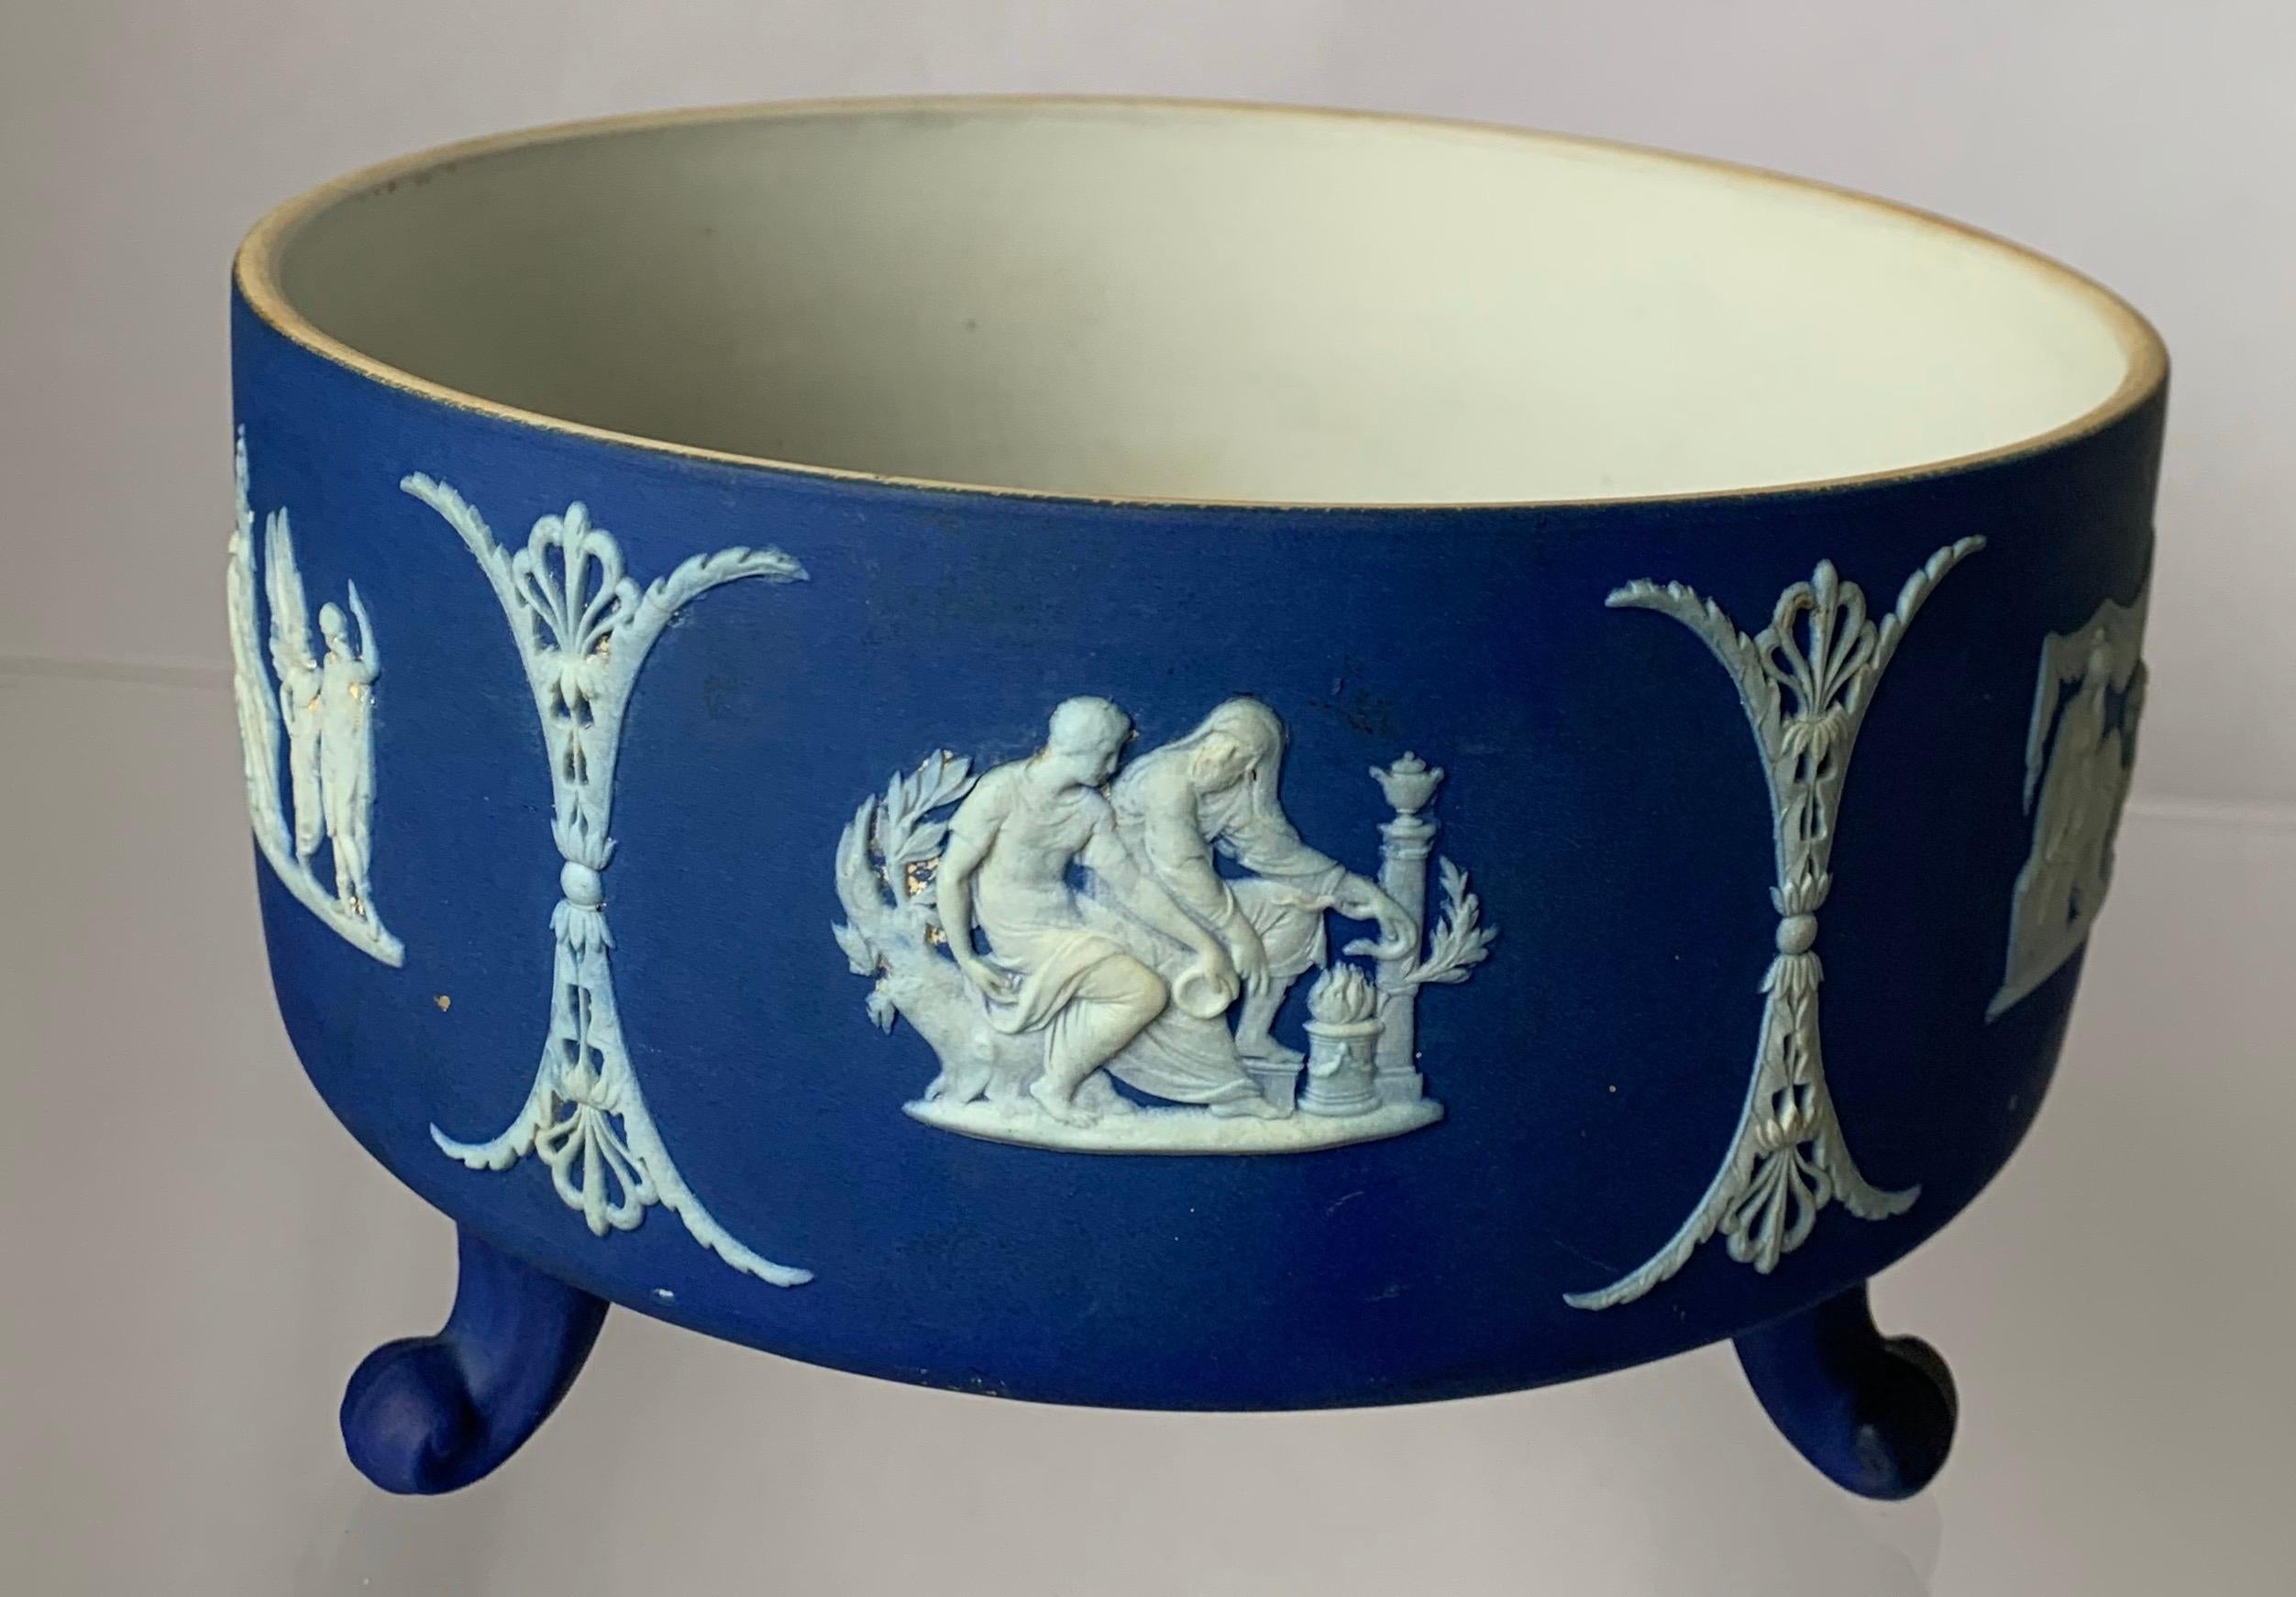 1930s Wedgwood jasperware footed bowl. Dark blue jasperware with all-over white neoclassical motif tripod footed base. Interior of the bowl is glazed. Bowl is stamped Wedgwood made in England on the underside.